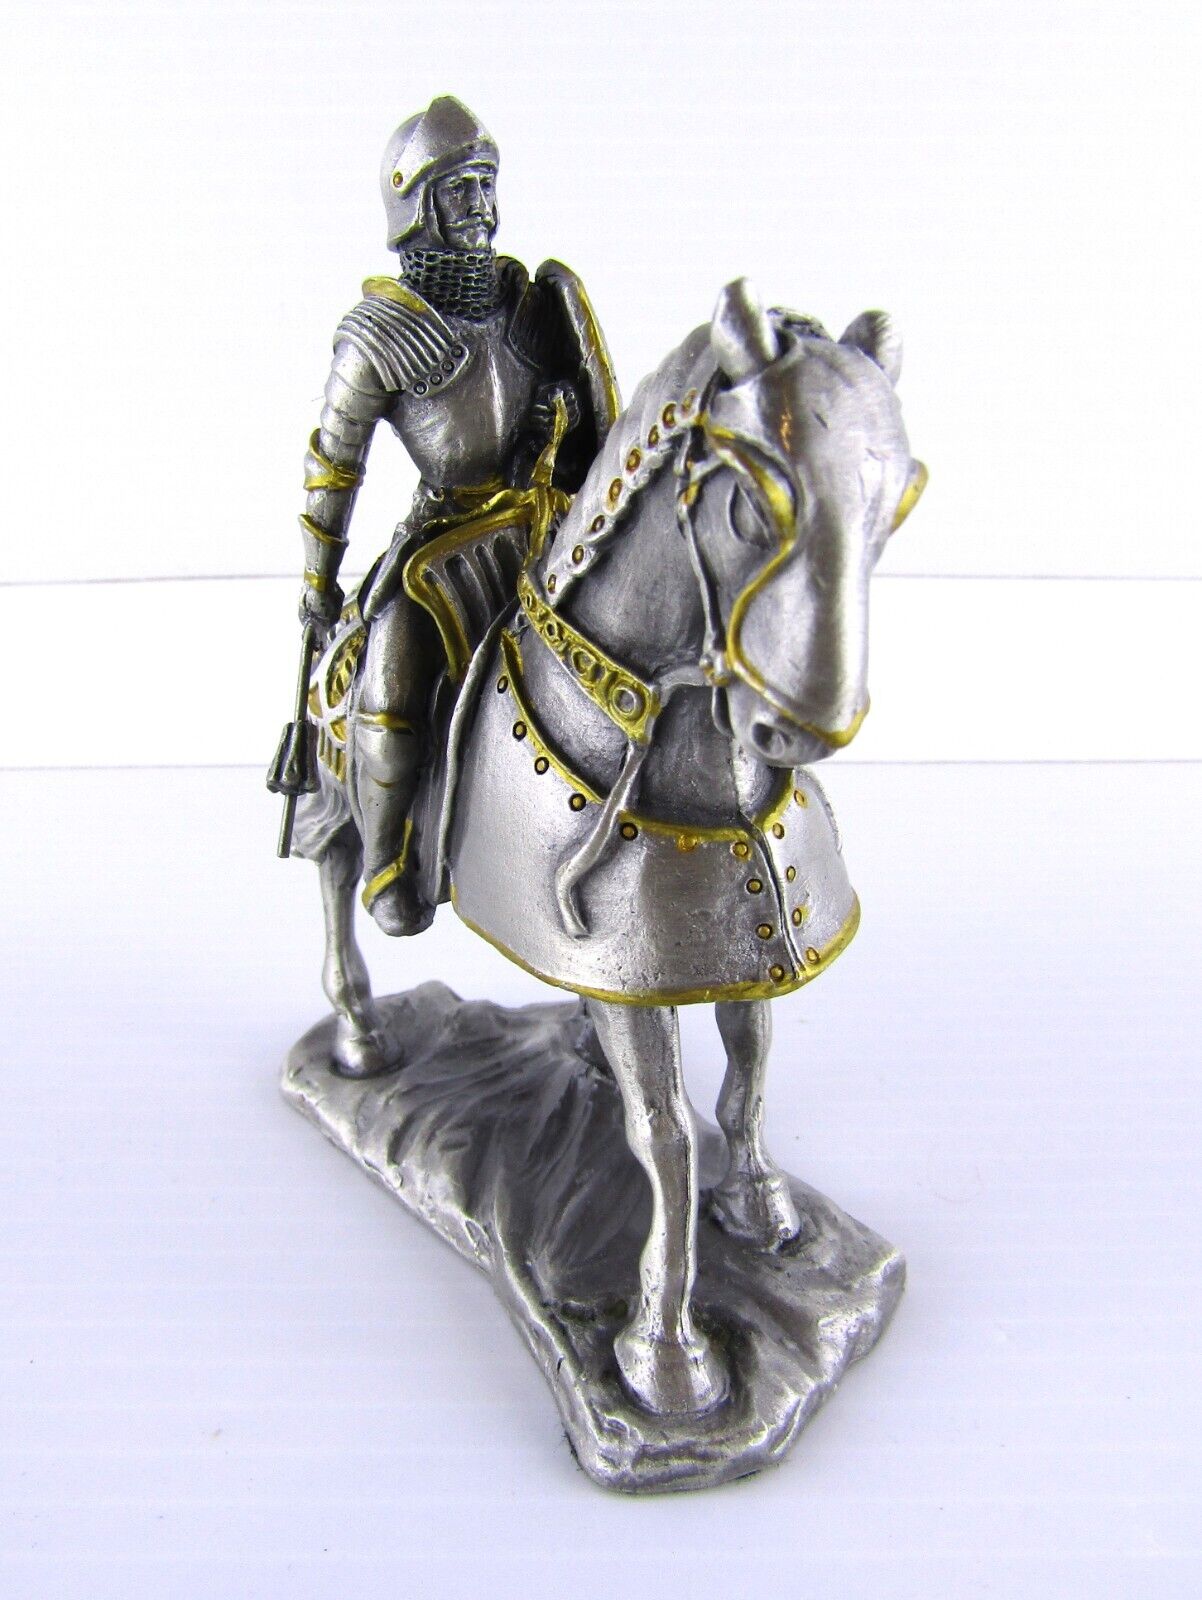 2013 Summit Collection French Knight on Horseback Lead Free Pewter War Figurine